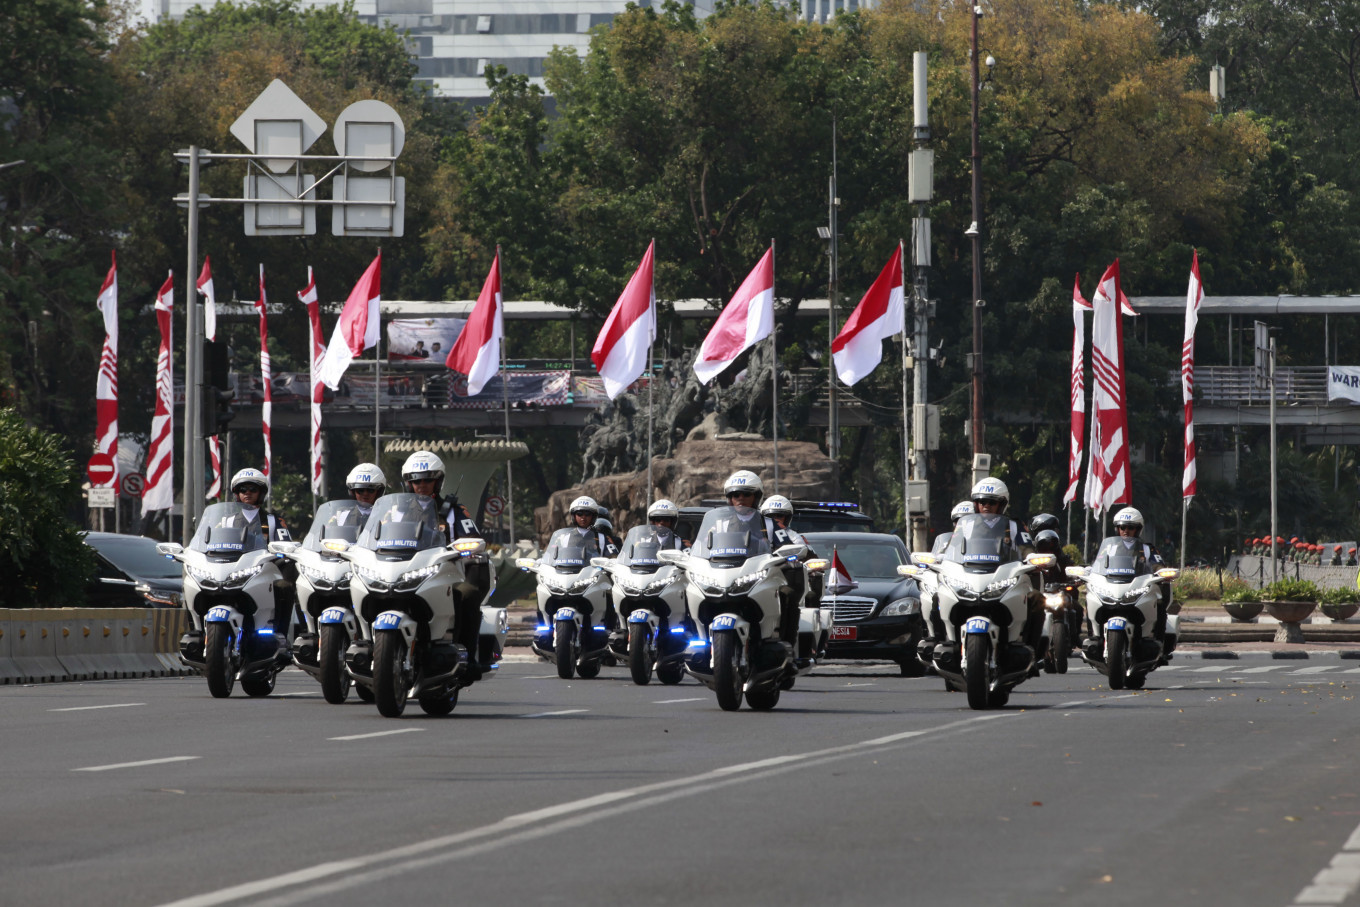 A convoy of vehicles carrying the President passes the front of Bank Indonesia Fountain, Jakarta, on its way to the inauguration ceremony. JP/Narabeto Korohama